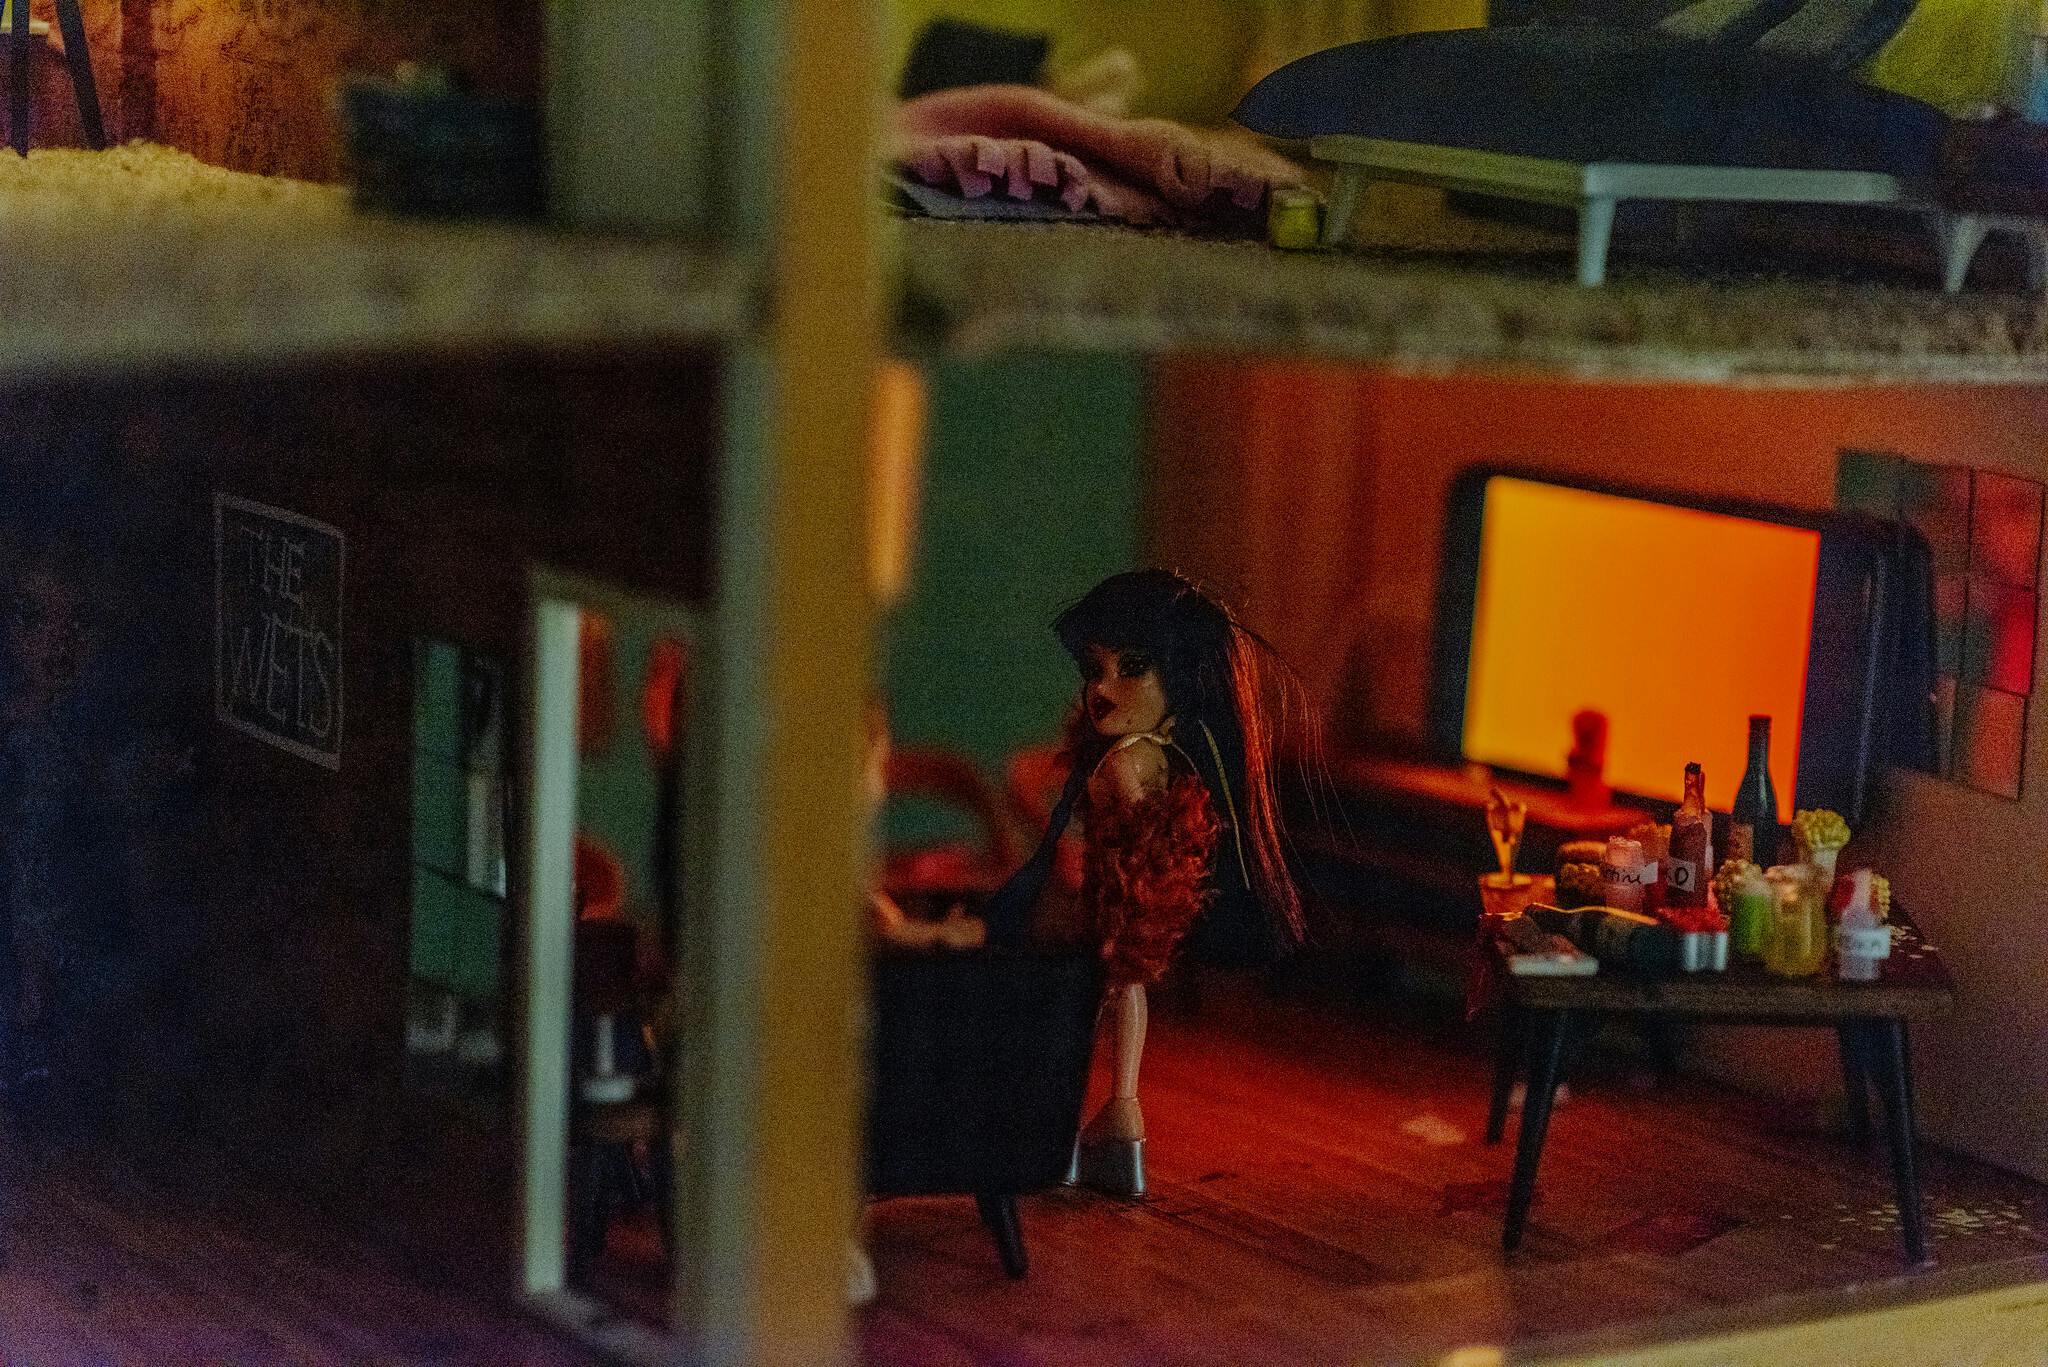 A close up view of a dolls house with dolls at a party with red light from a small tv screen